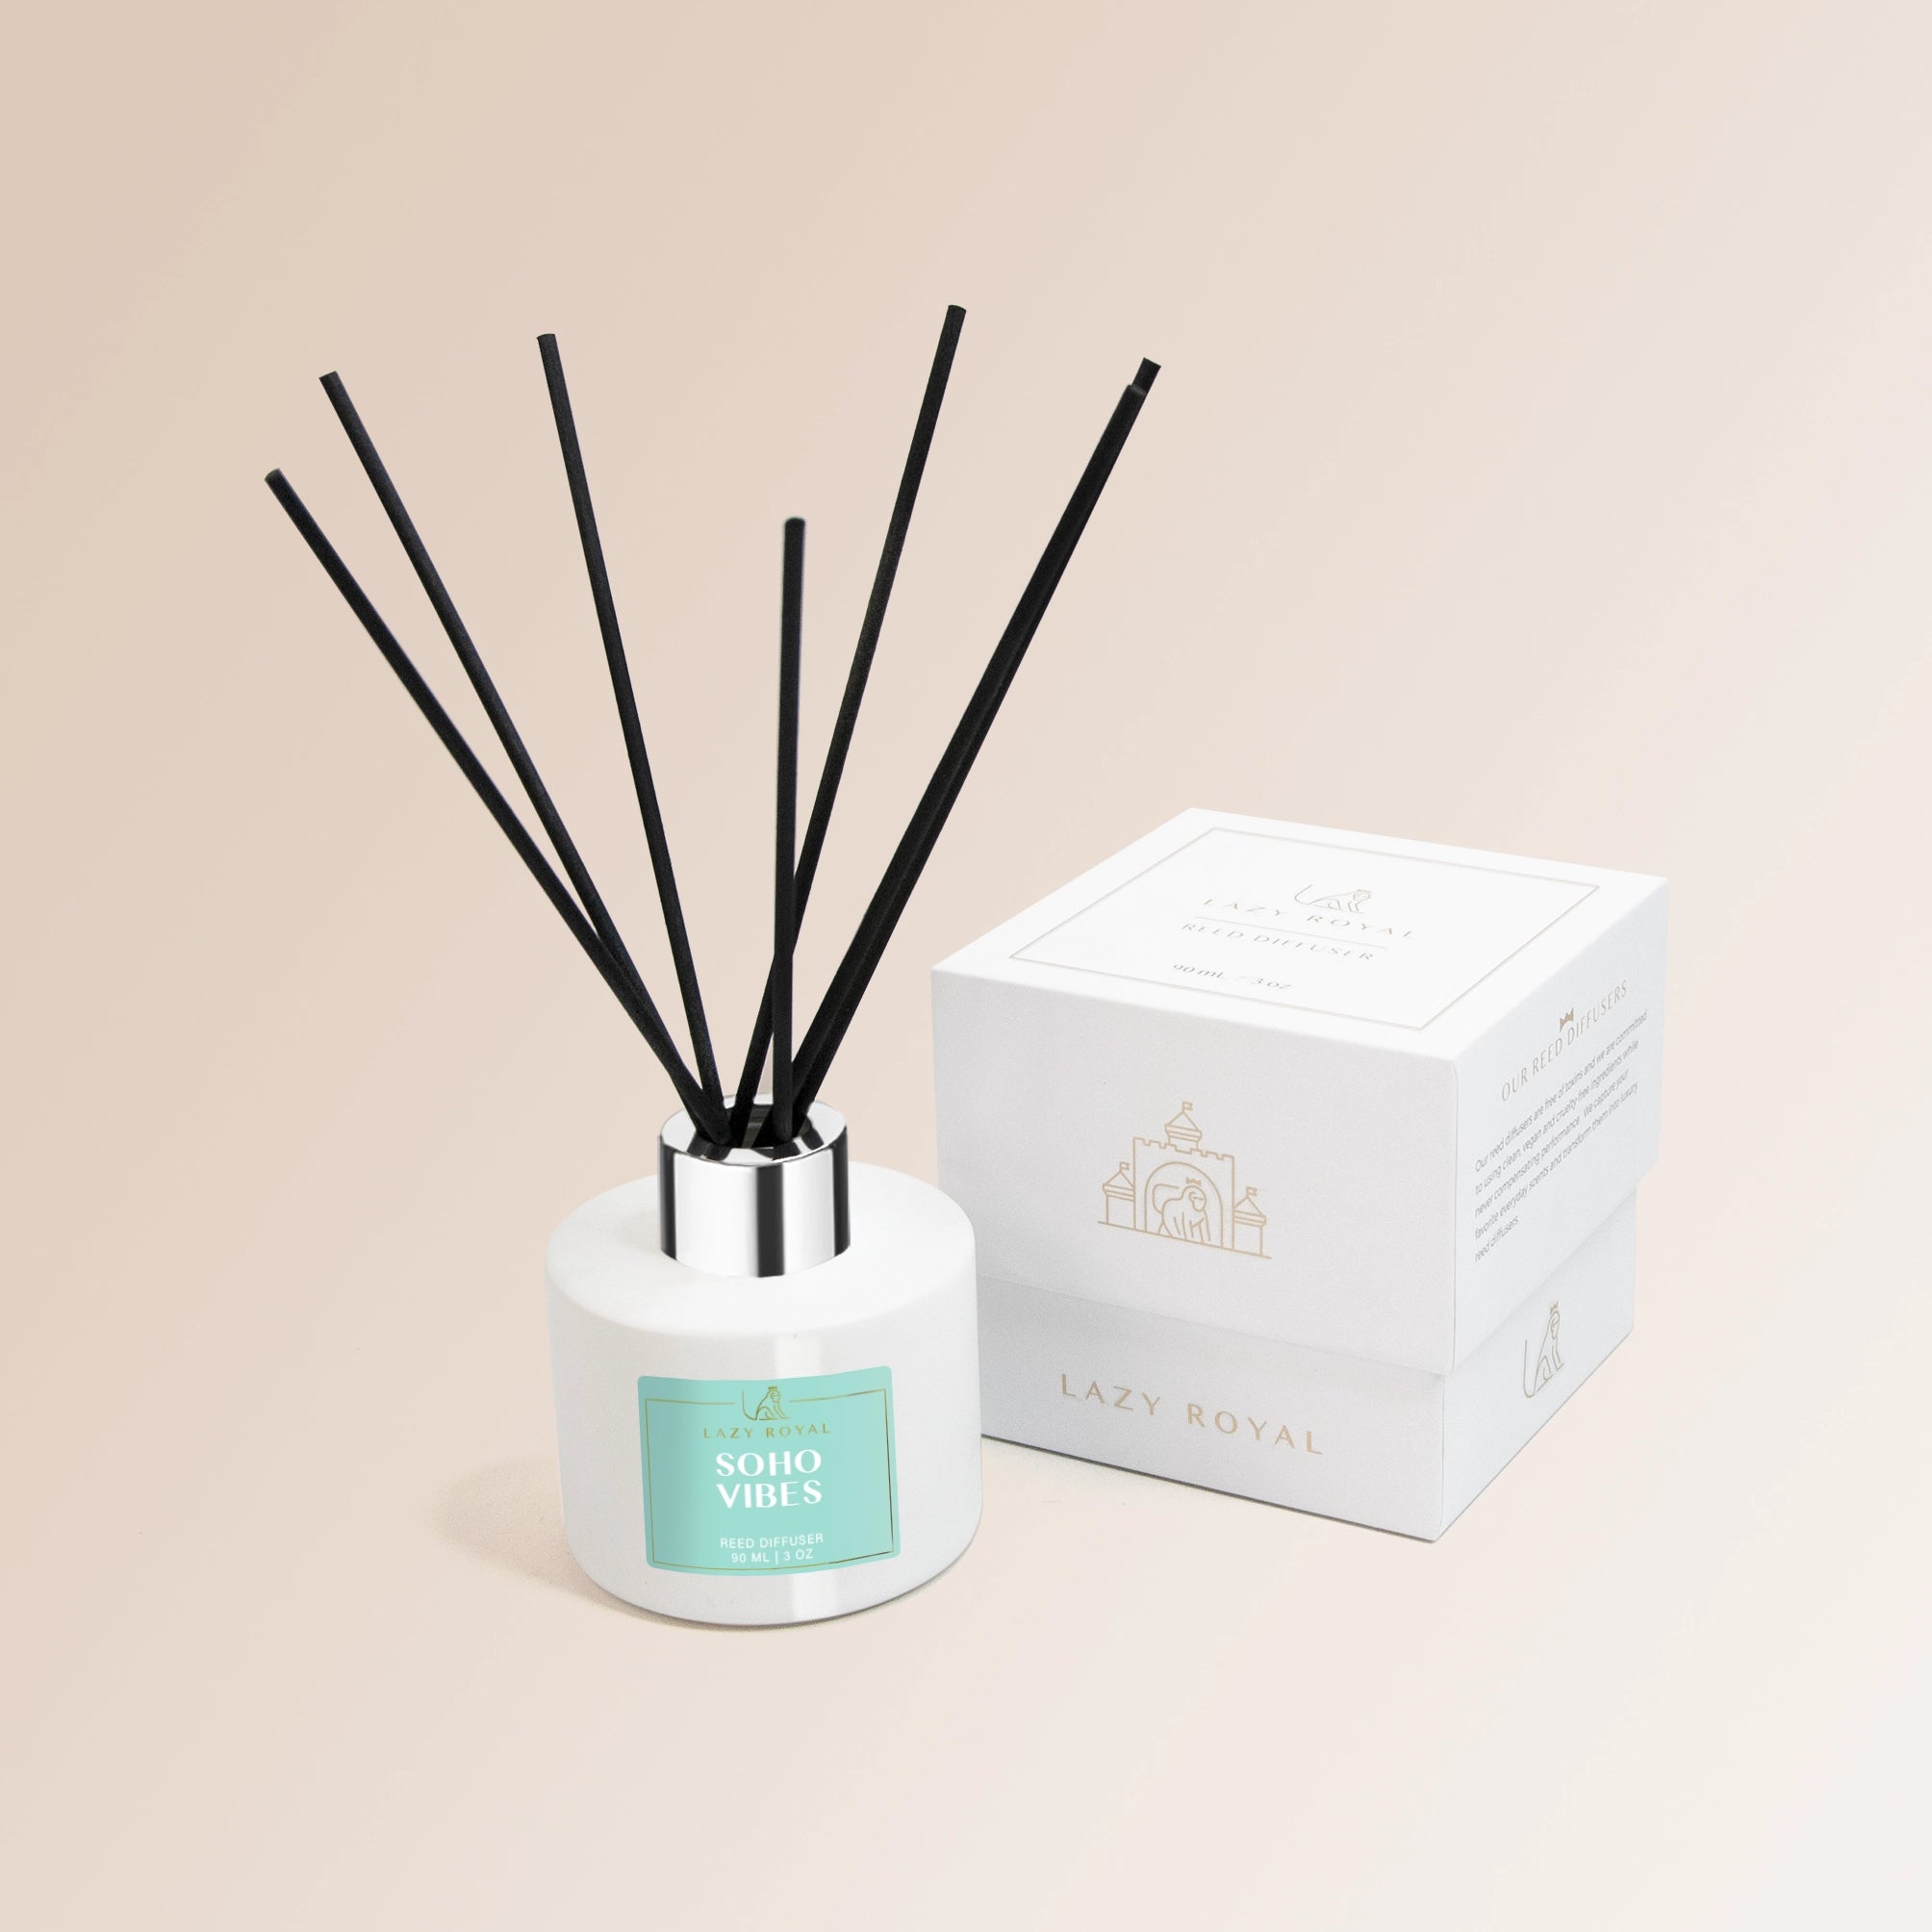 Inspired by Cade 26 - Soho Vibes Reed Diffuser